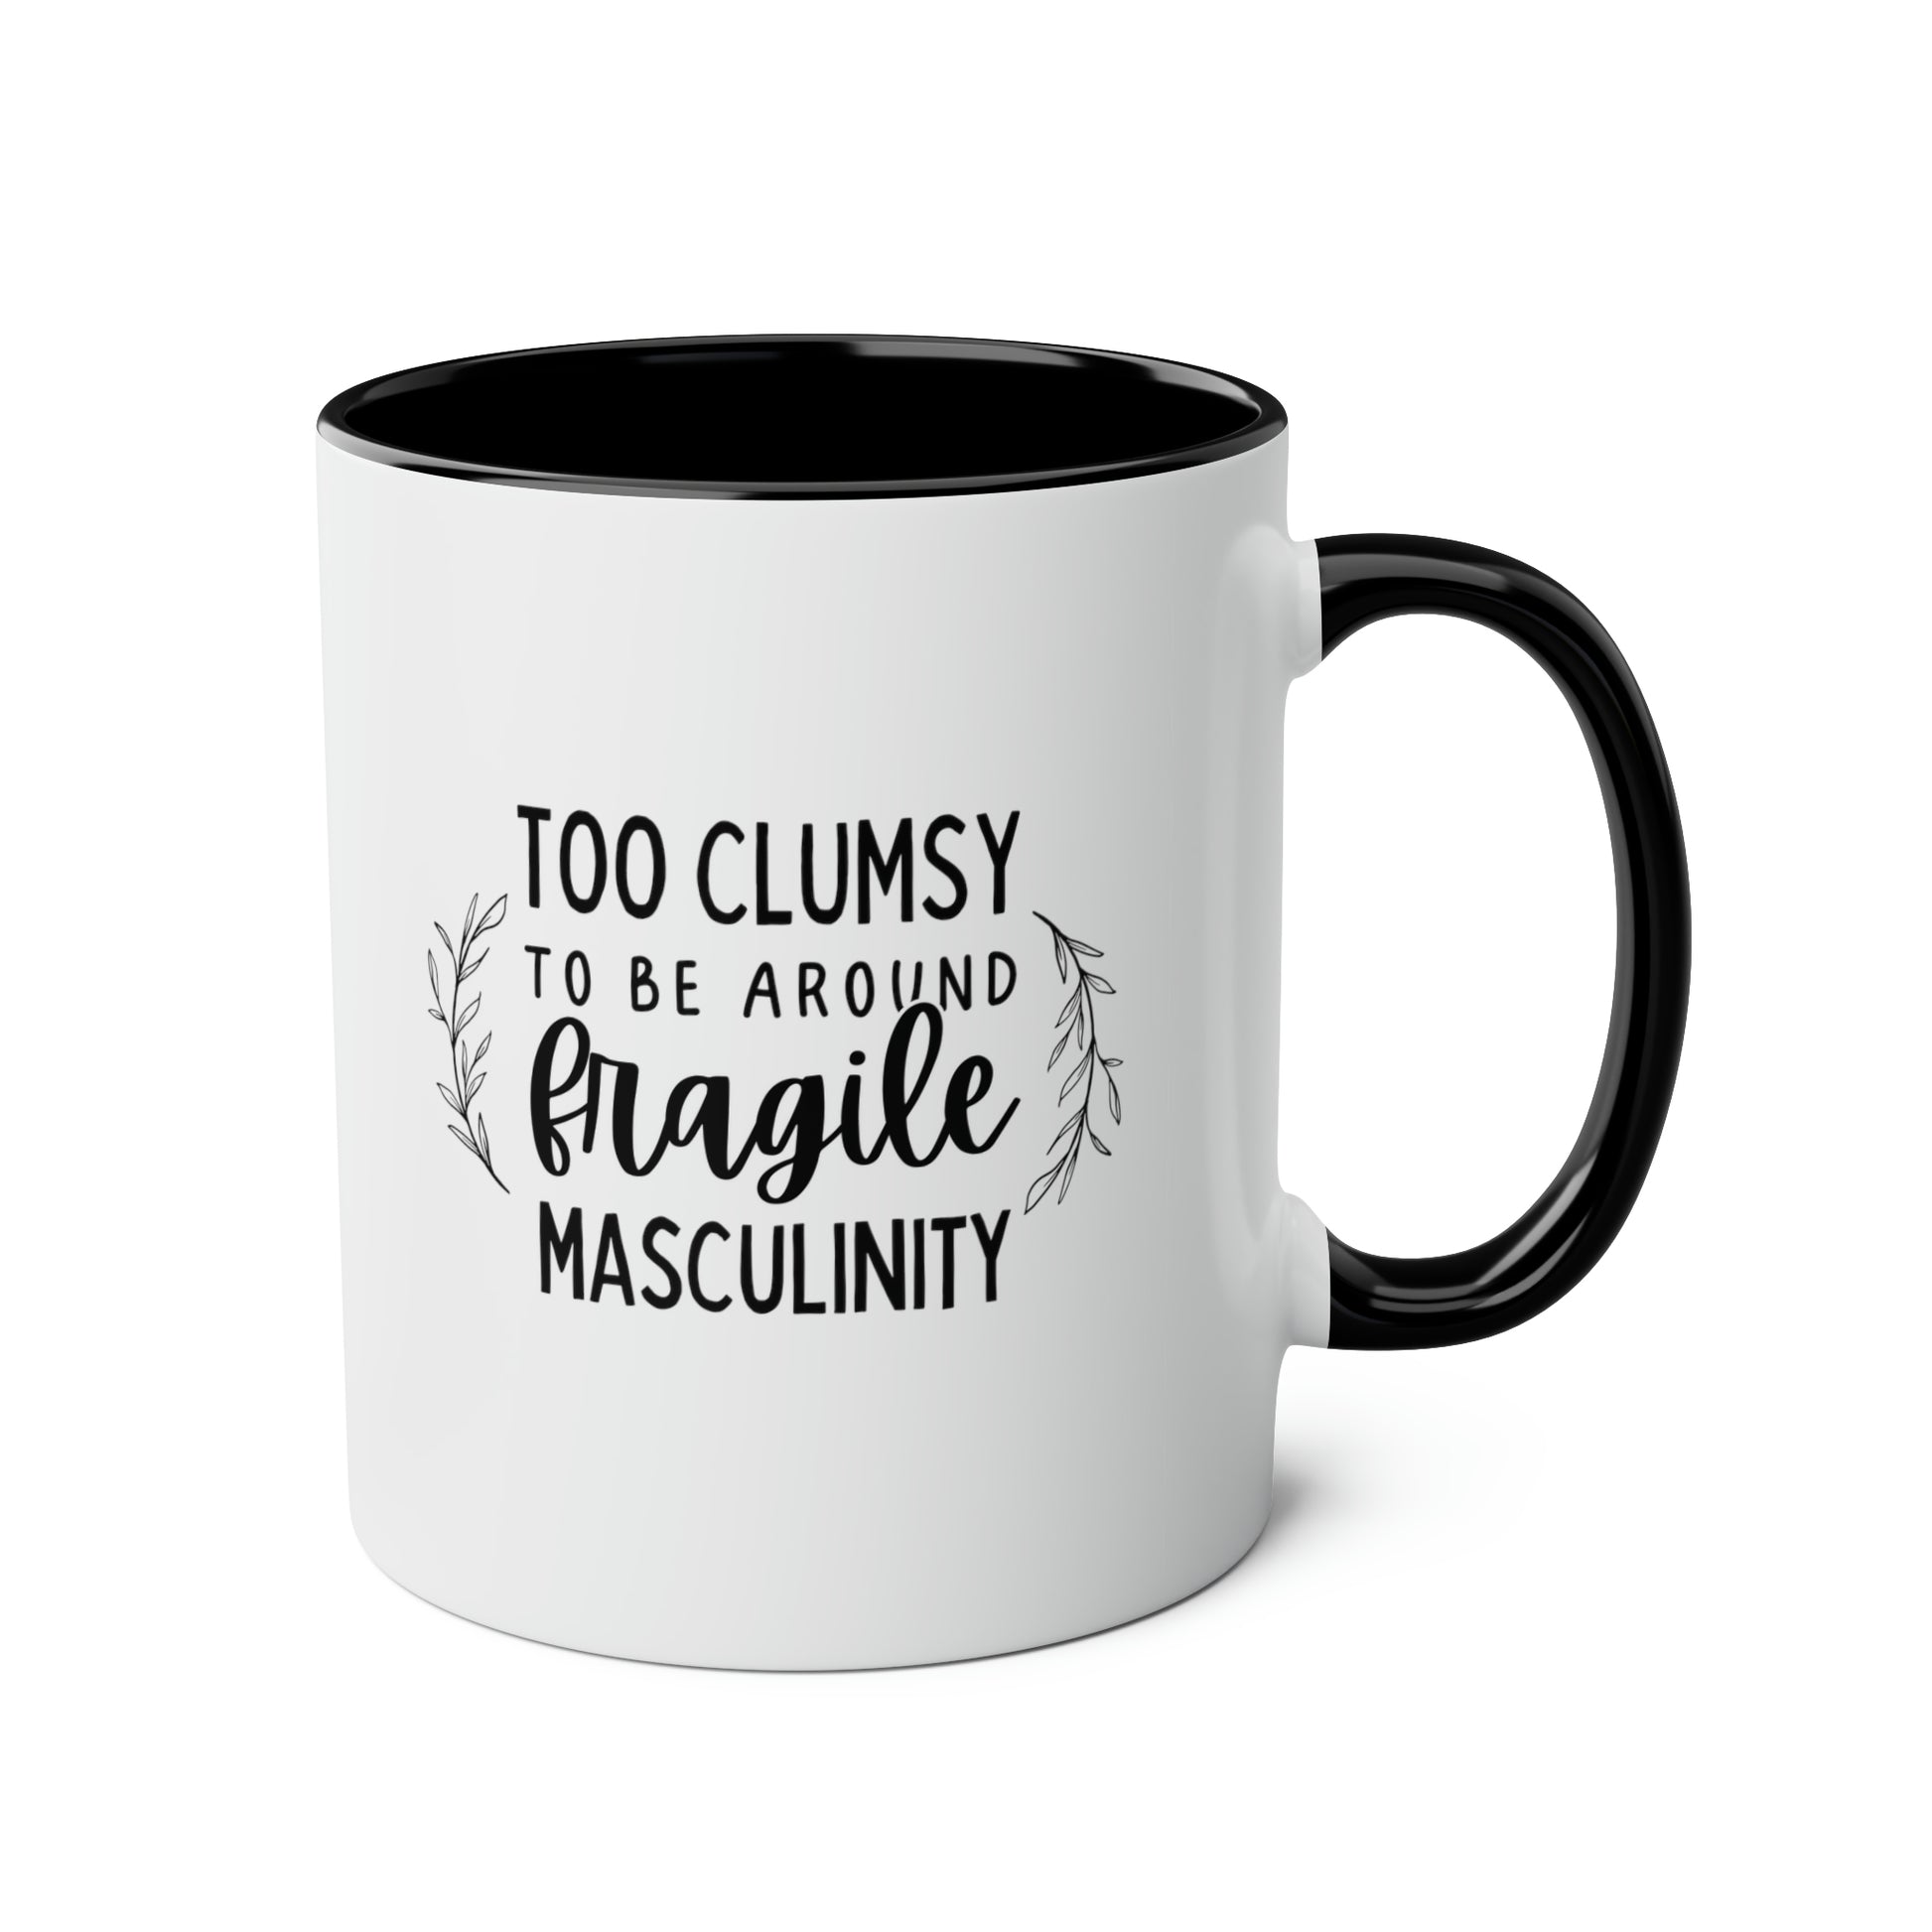 Too Clumsy to be Around Fragile Masculinity 11oz white with black accent funny large coffee mug gift for women feminist feminism waveywares wavey wares wavywares wavy wares